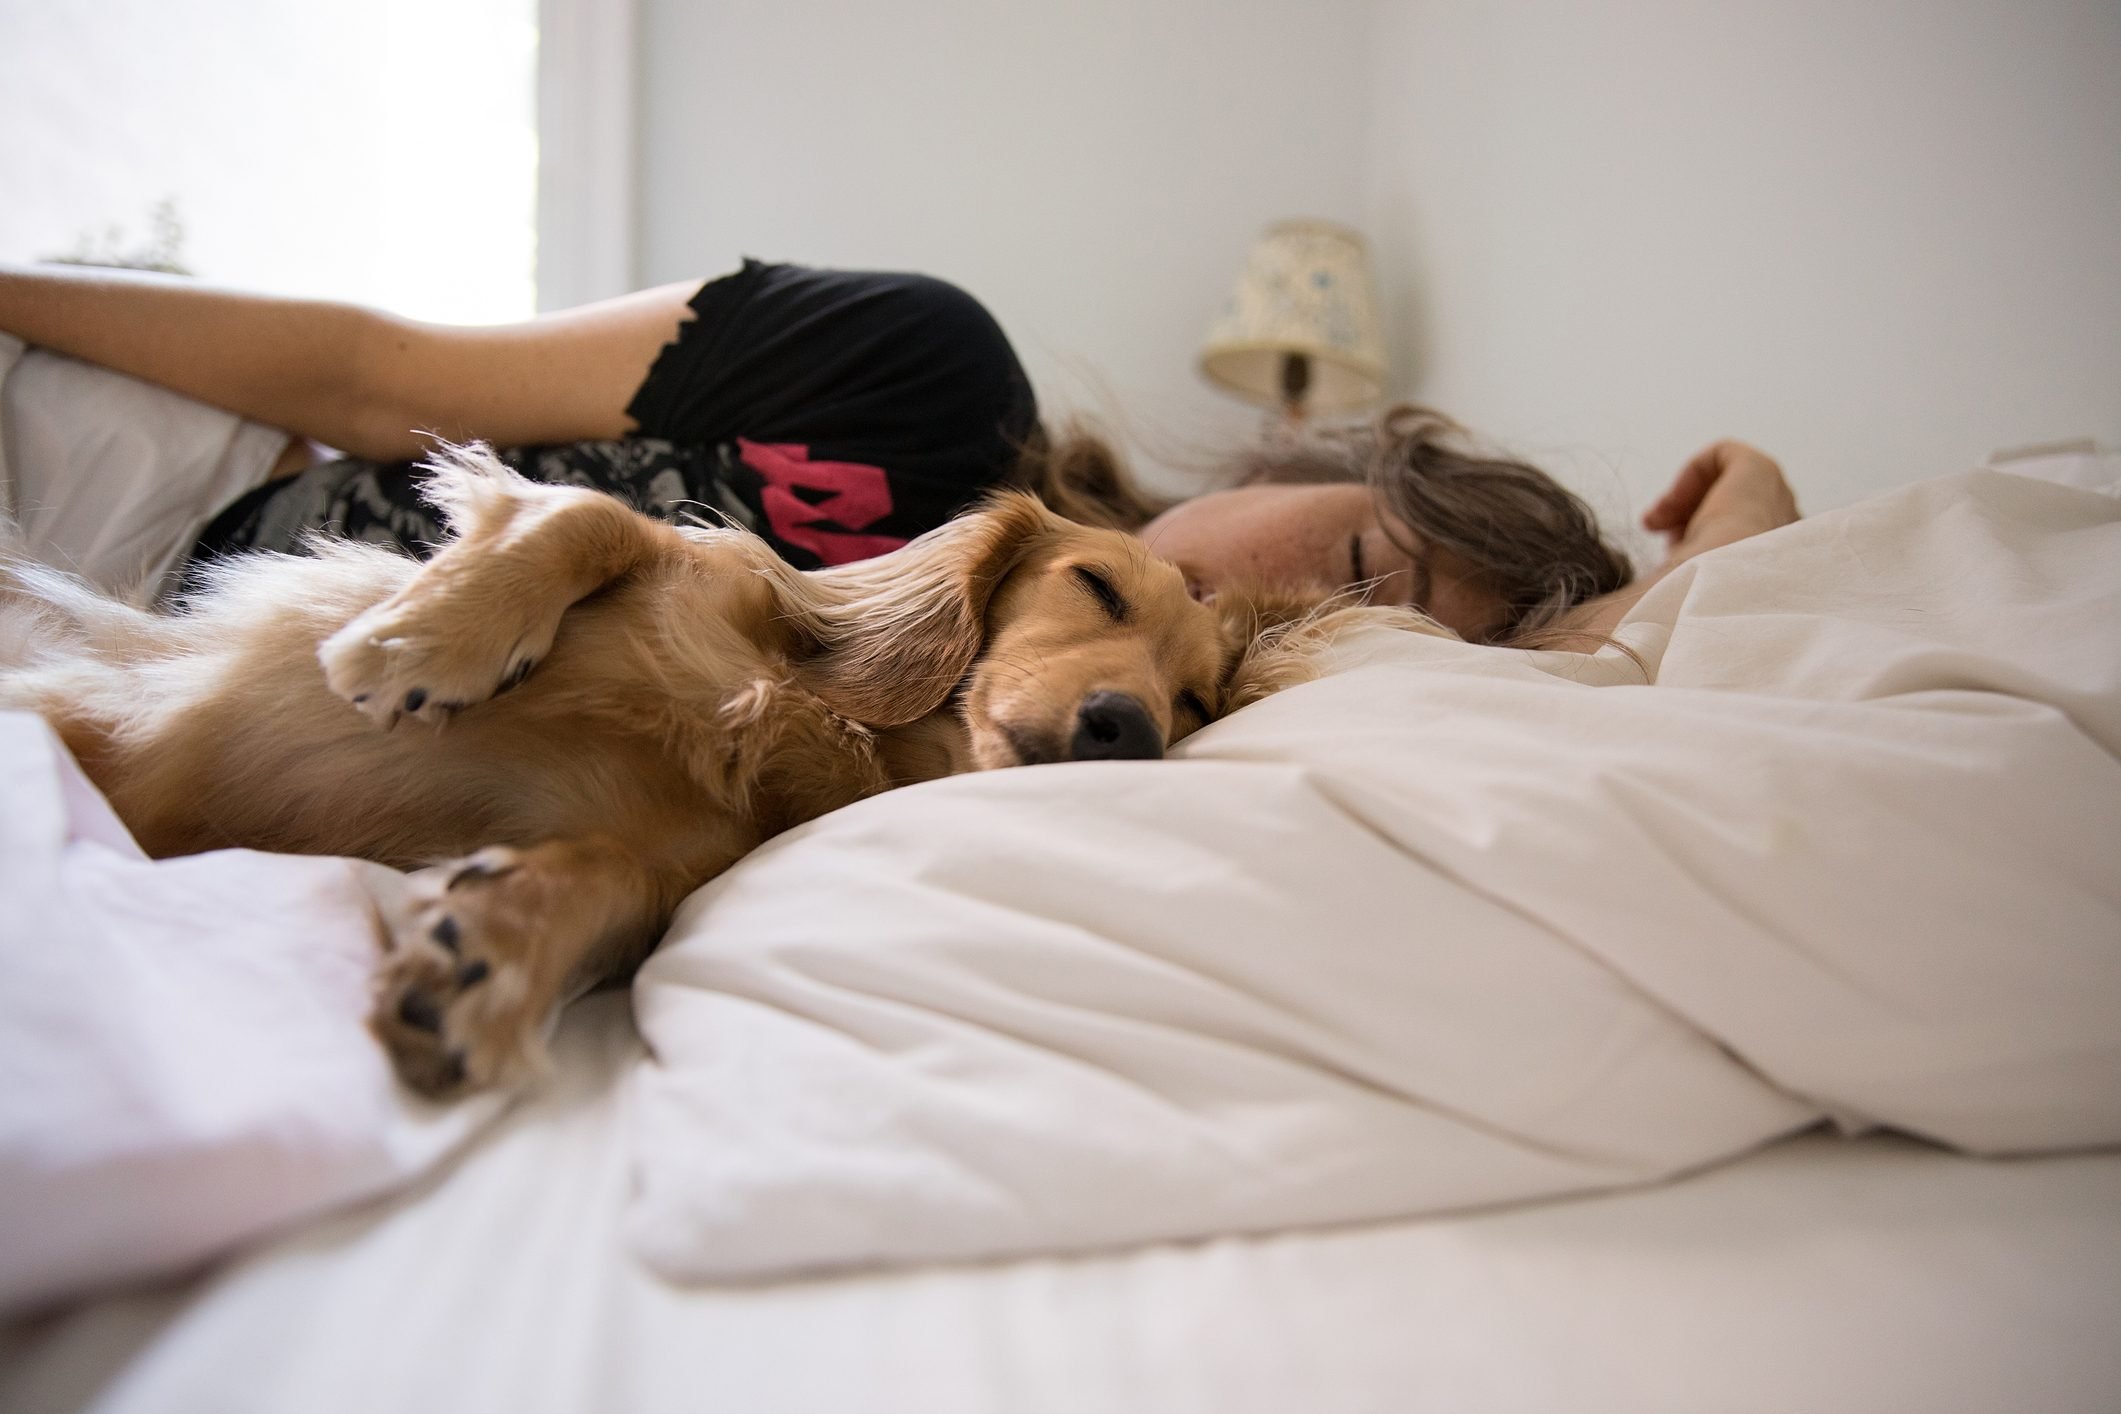 Should Your Dog Be Sleeping in Your Bed? Here's What the Experts Say